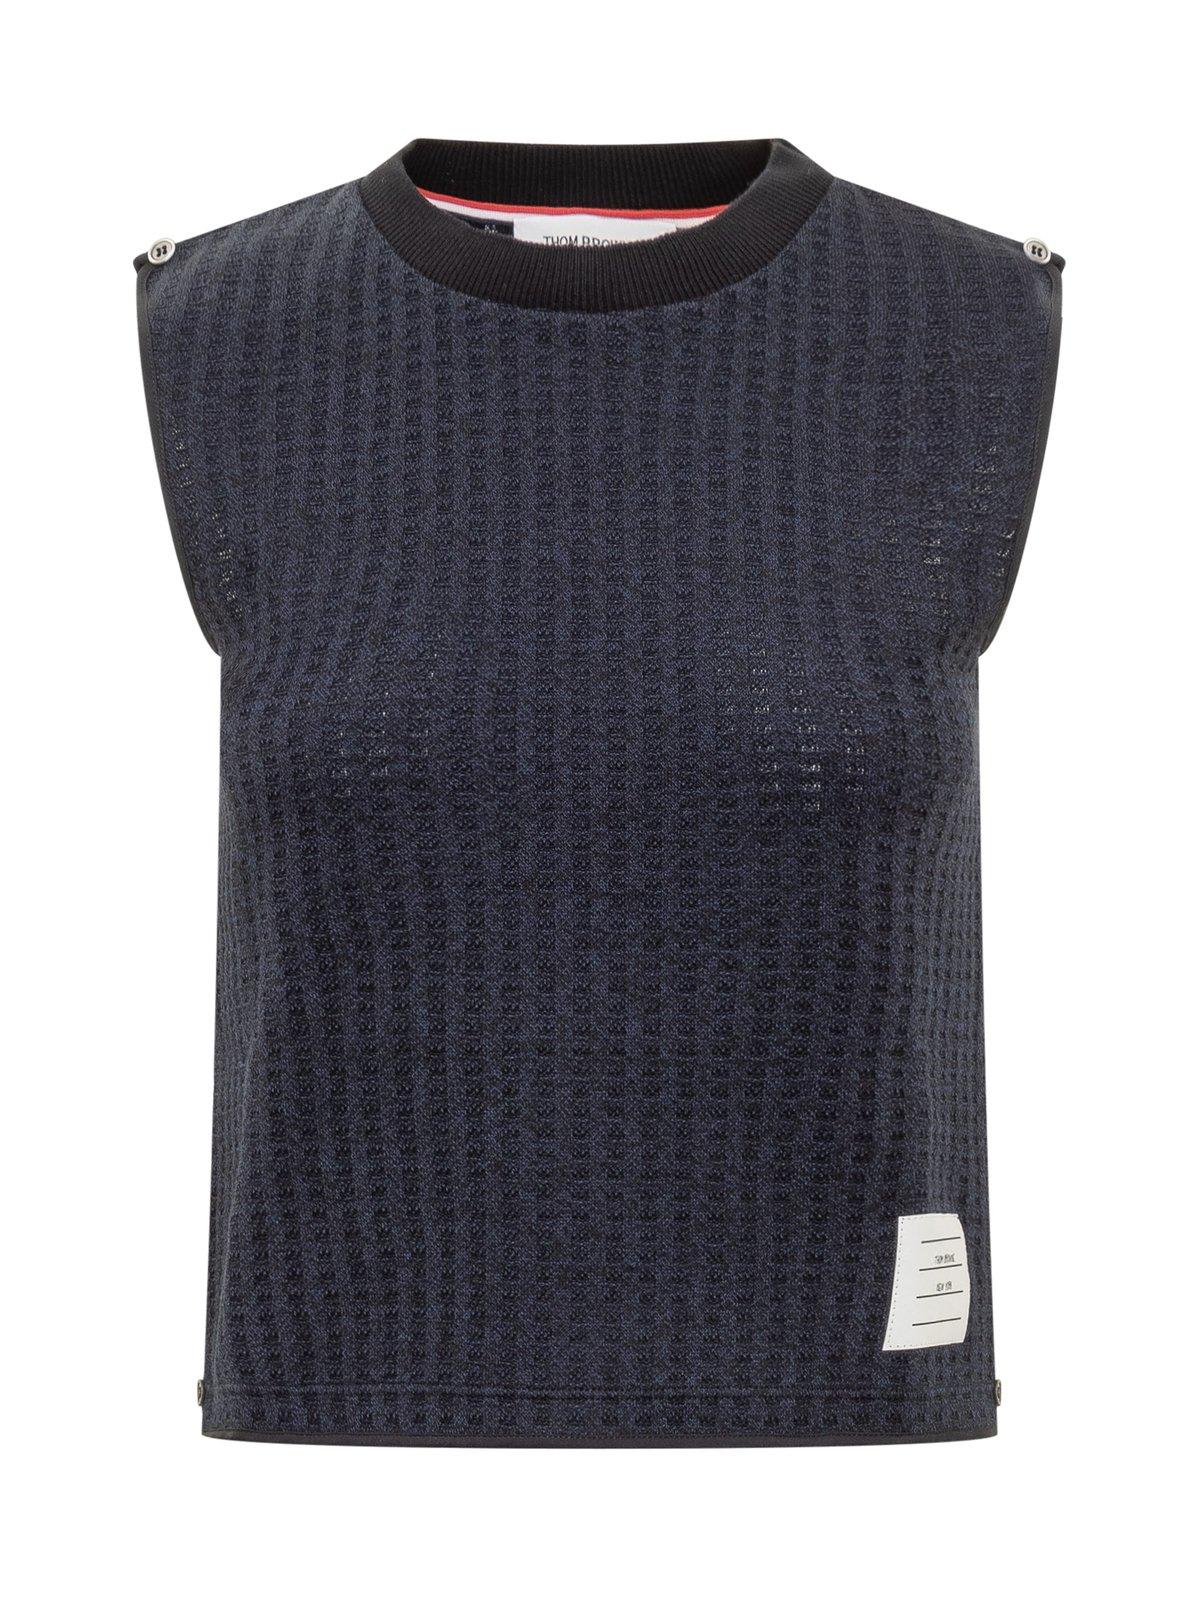 THOM BROWNE LOGO PATCH KNITTED TOP